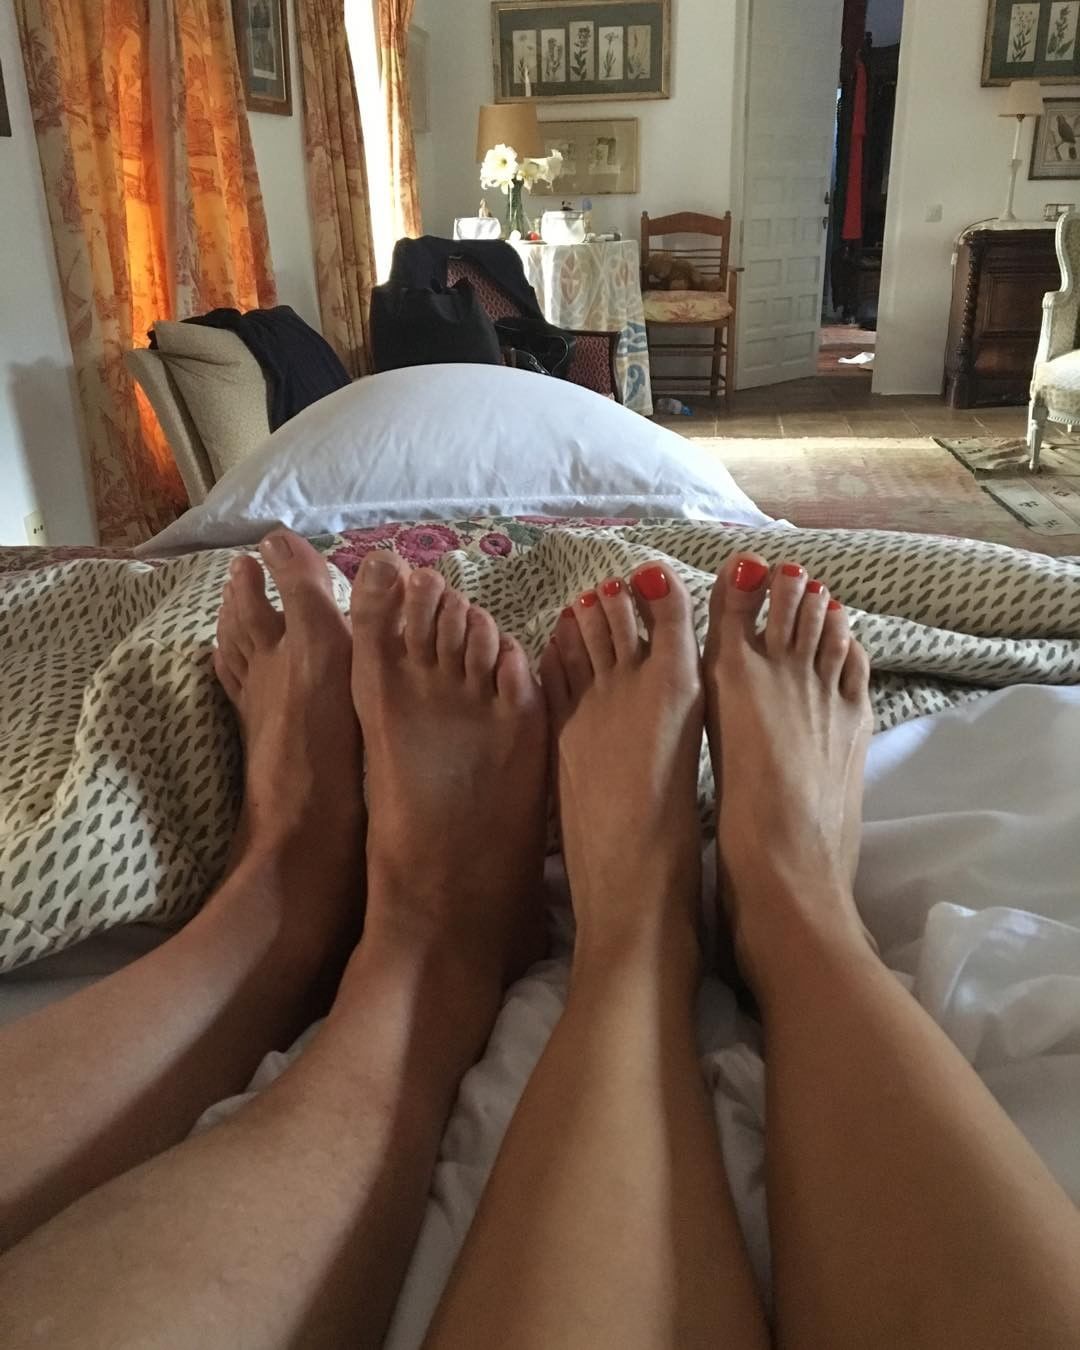 Nice feet, but shes literally in bed with the enemy. 